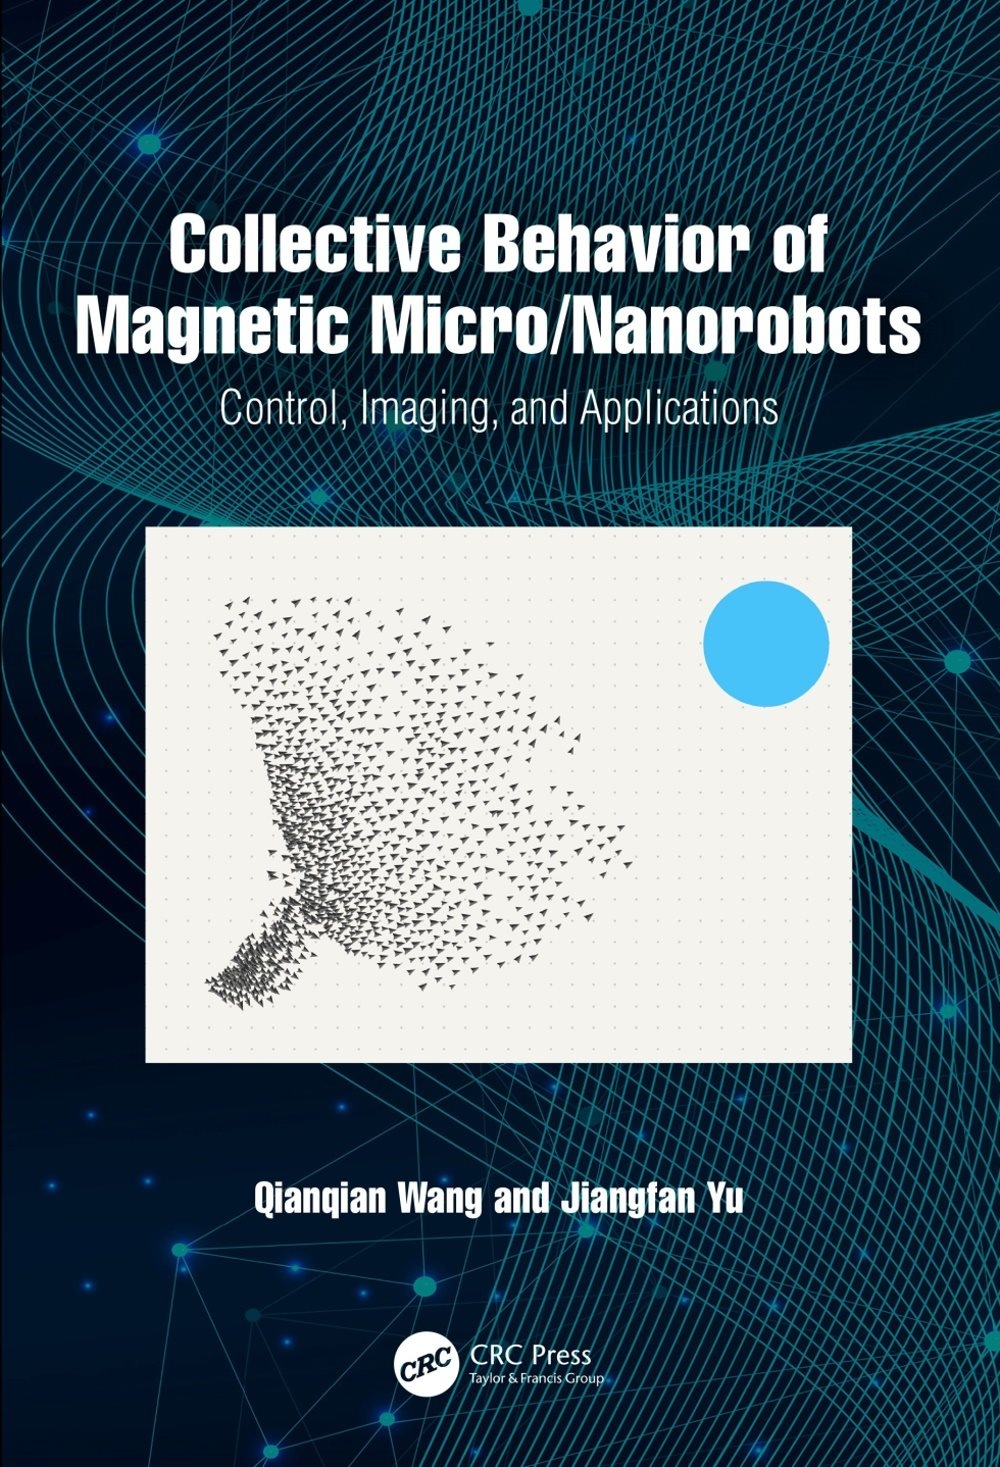 Collective Behavior of Magnetic Micro/Nanorobot: Control, Imaging, and Applications